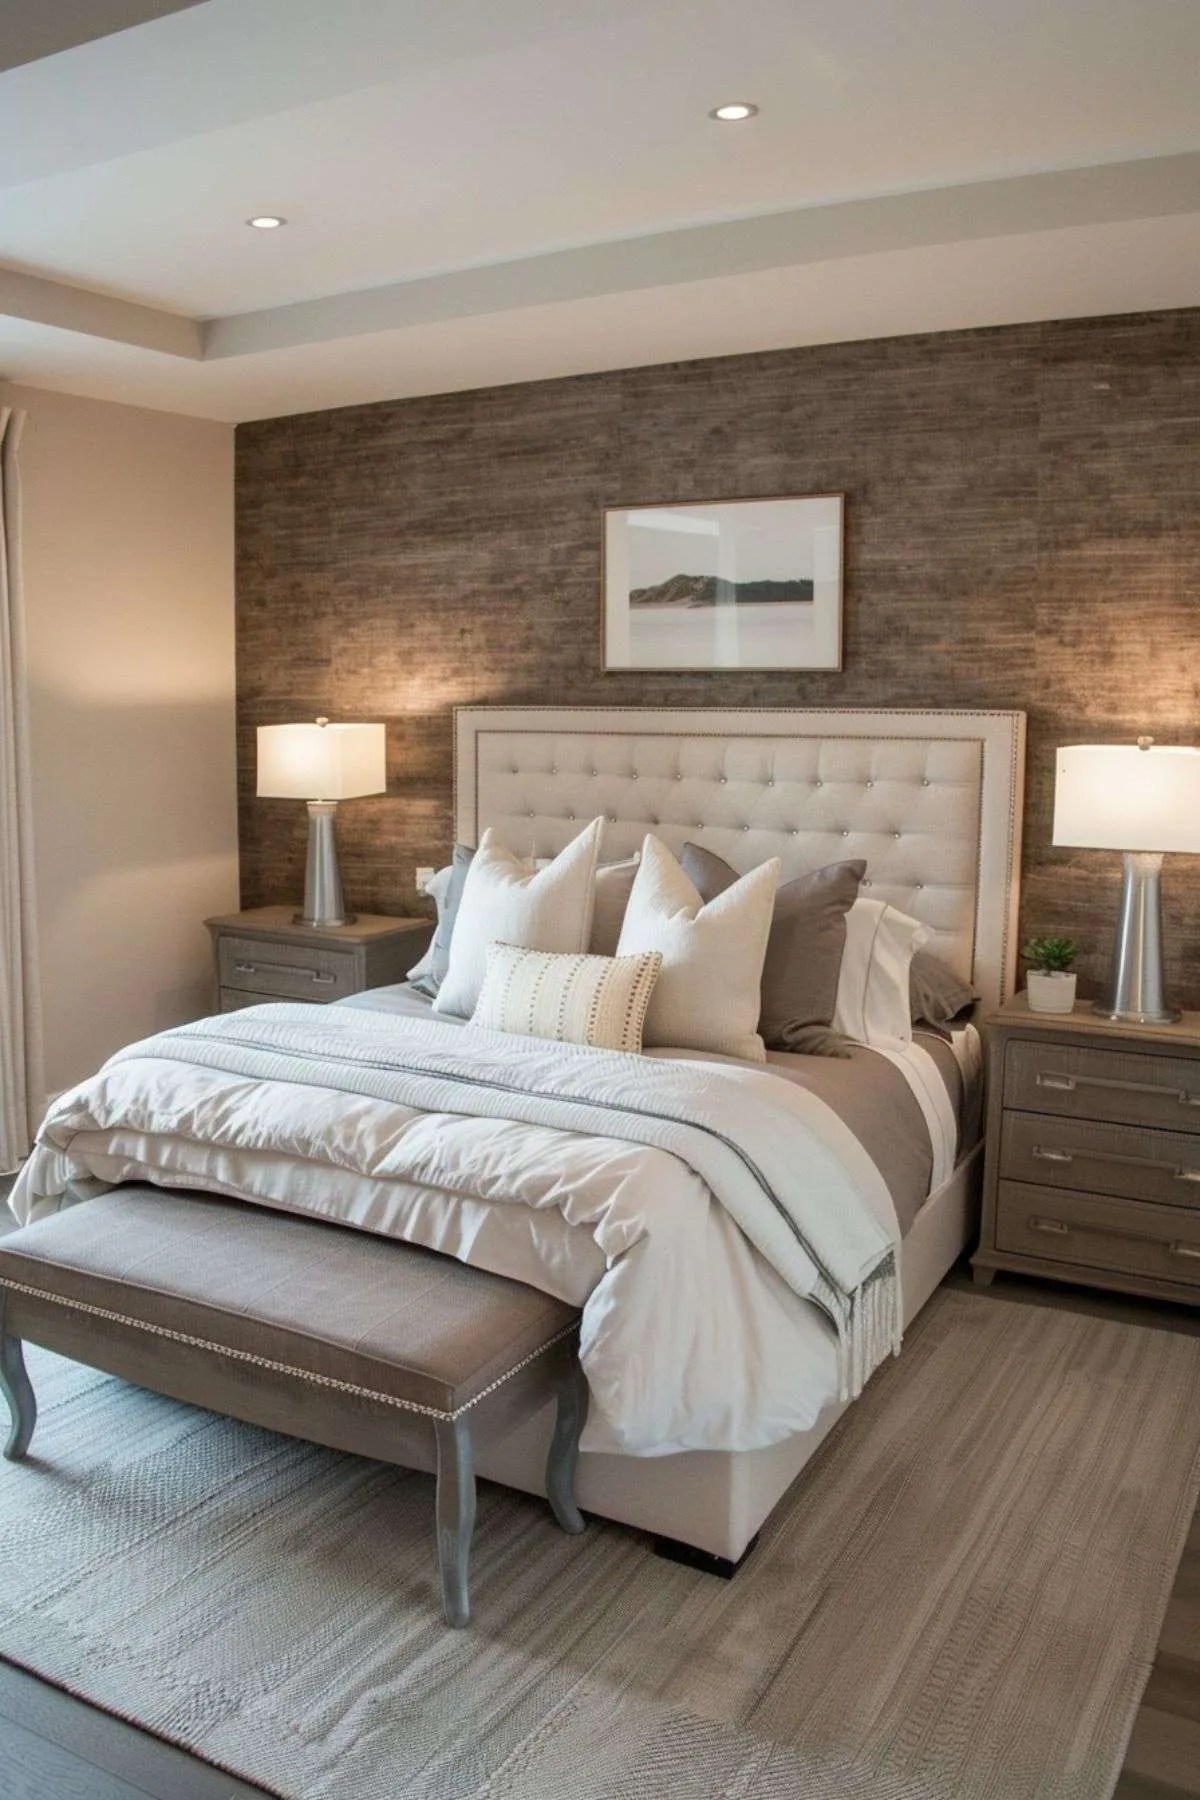 Hotel Bedroom Inspiration – The Ultimate Guide to an Elegant Bedroom